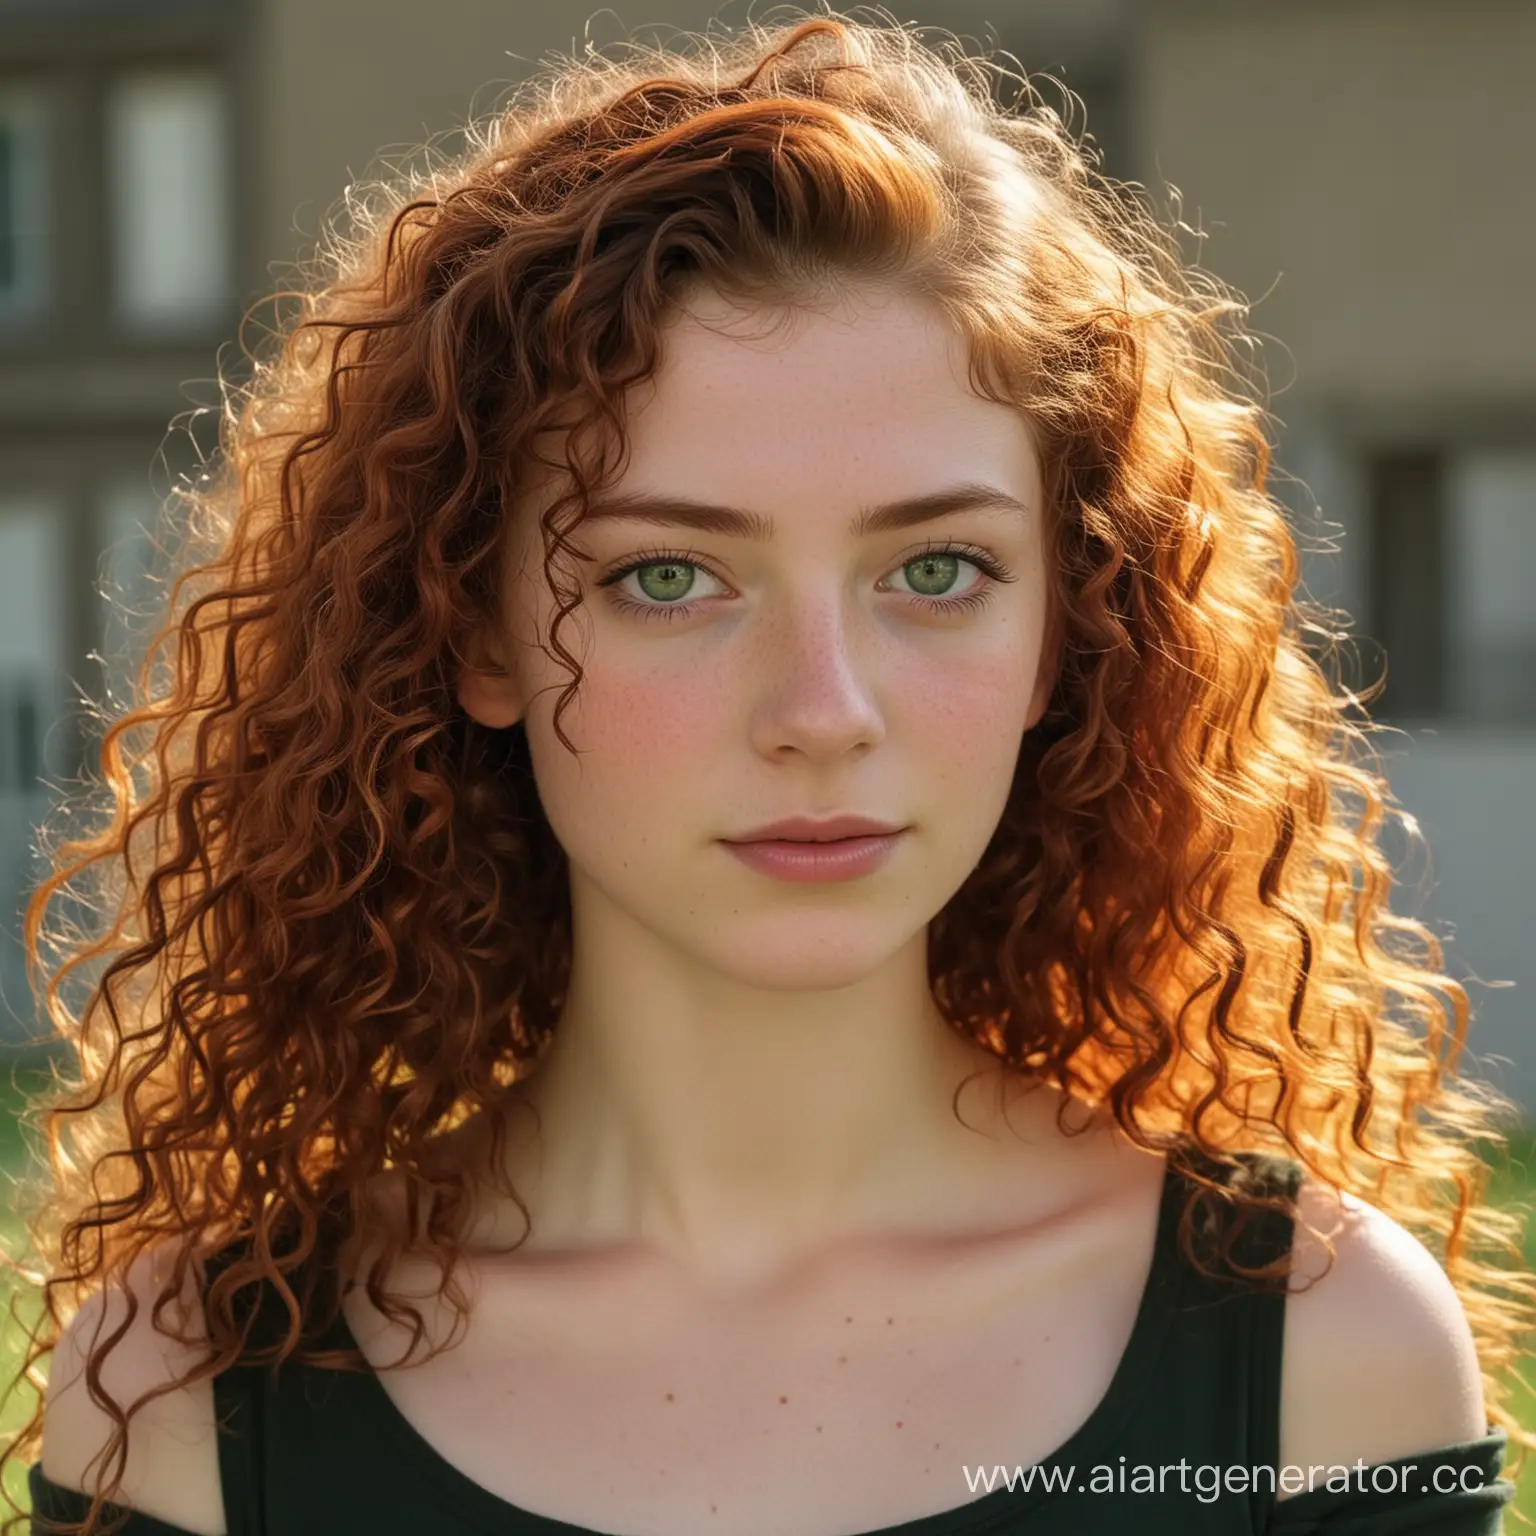 Serious-Teenage-Girl-with-Fiery-Red-Hair-and-Green-Eyes